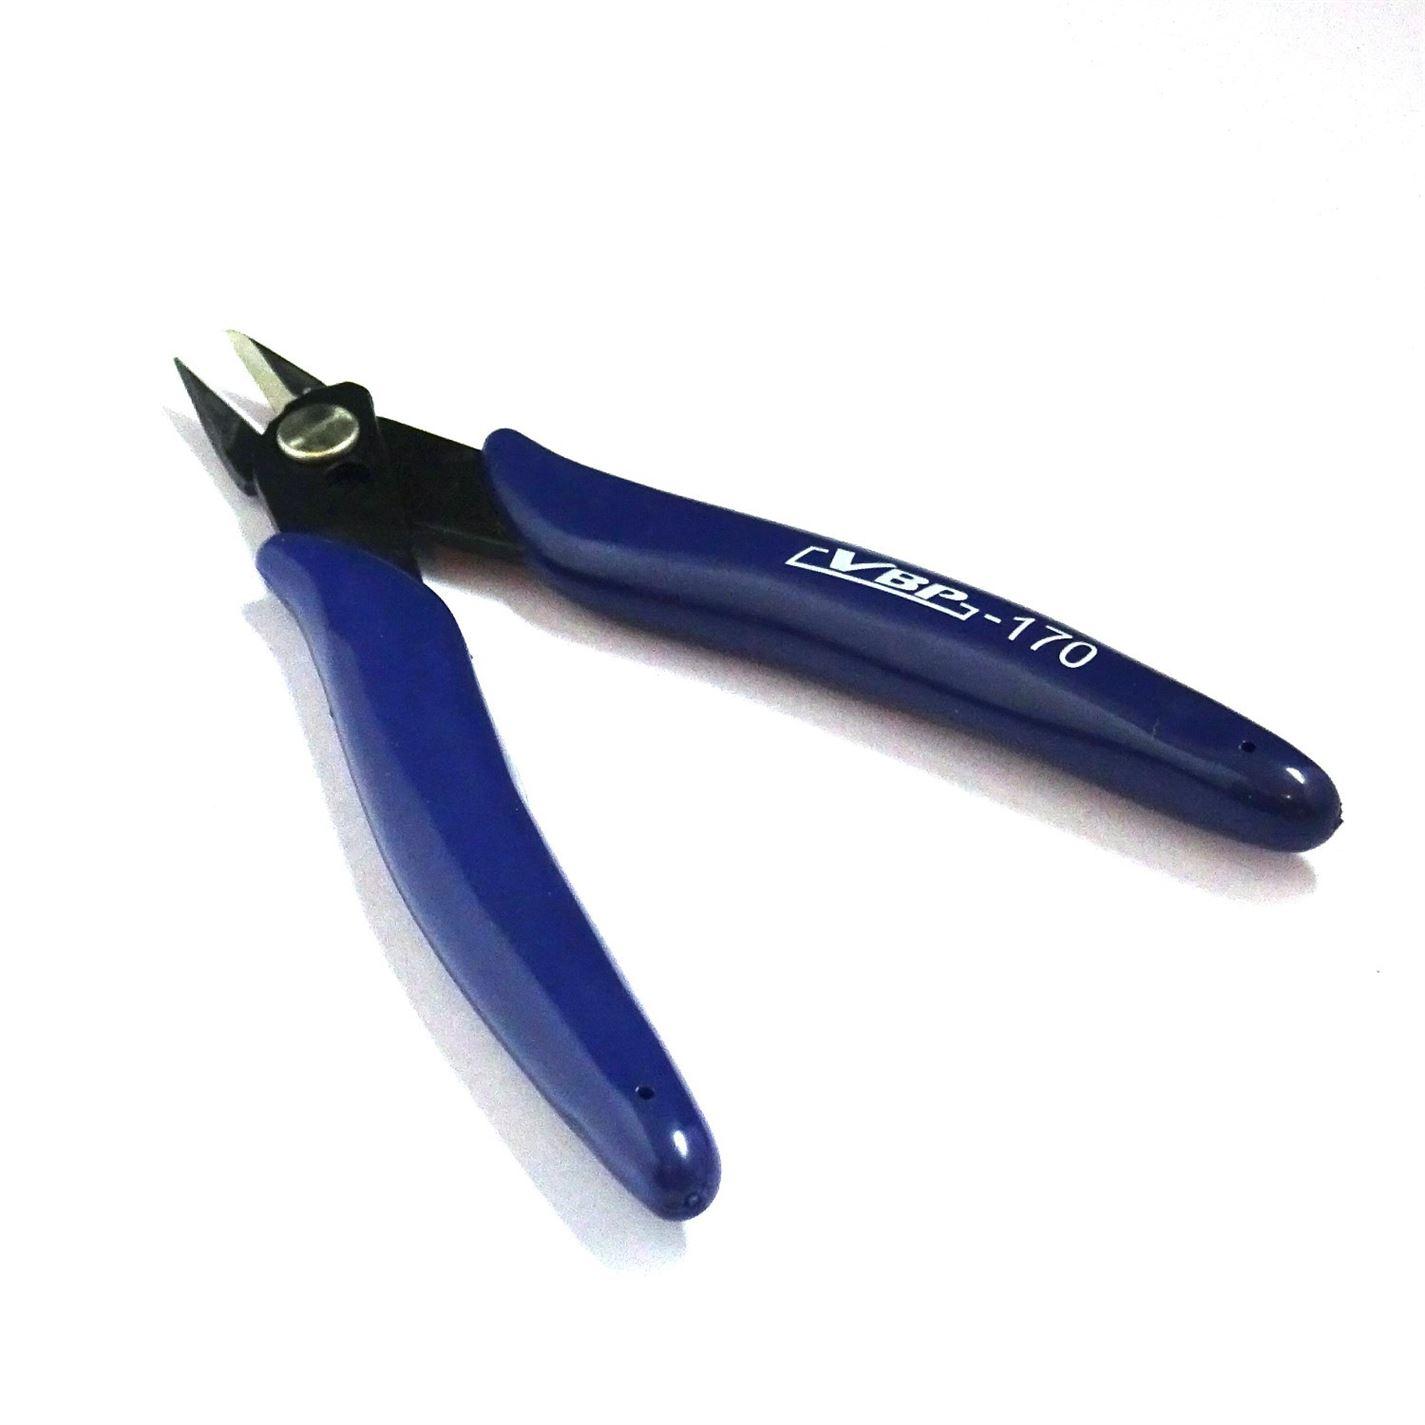 Electrical Wire Cutting Tool Plato Model 170 Shears Snips Side Cutters - UK Seller